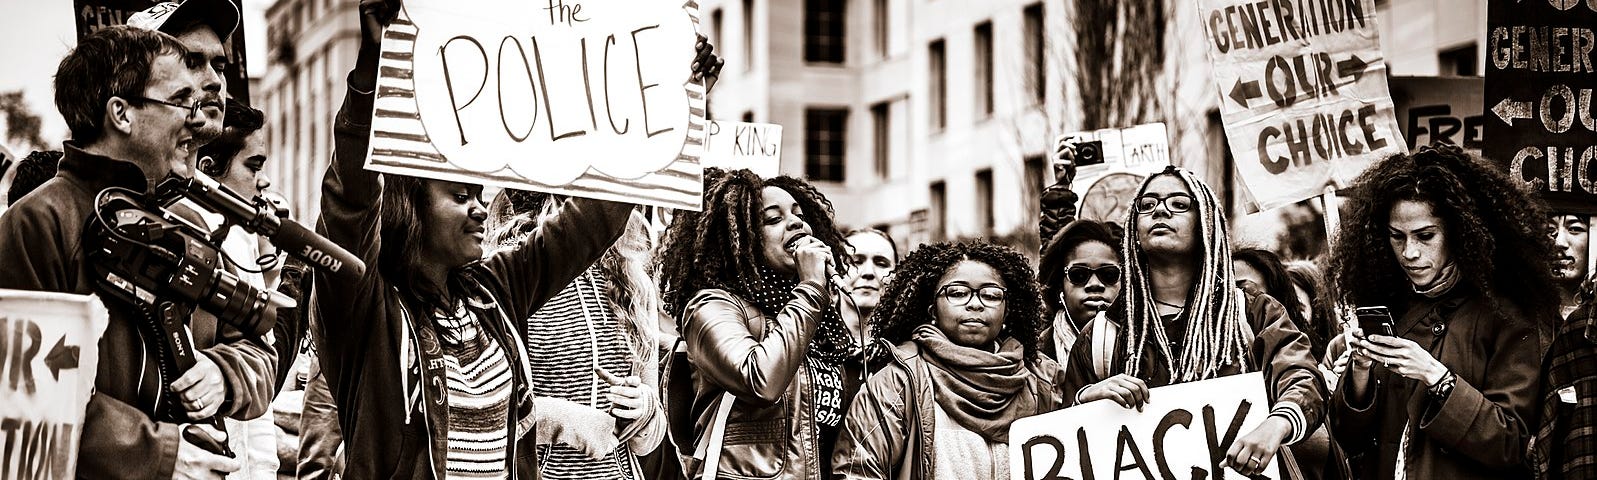 Mostly black women at a Black Lives Matter protest, with one holding a sign that says “Demilitarize the Police.”